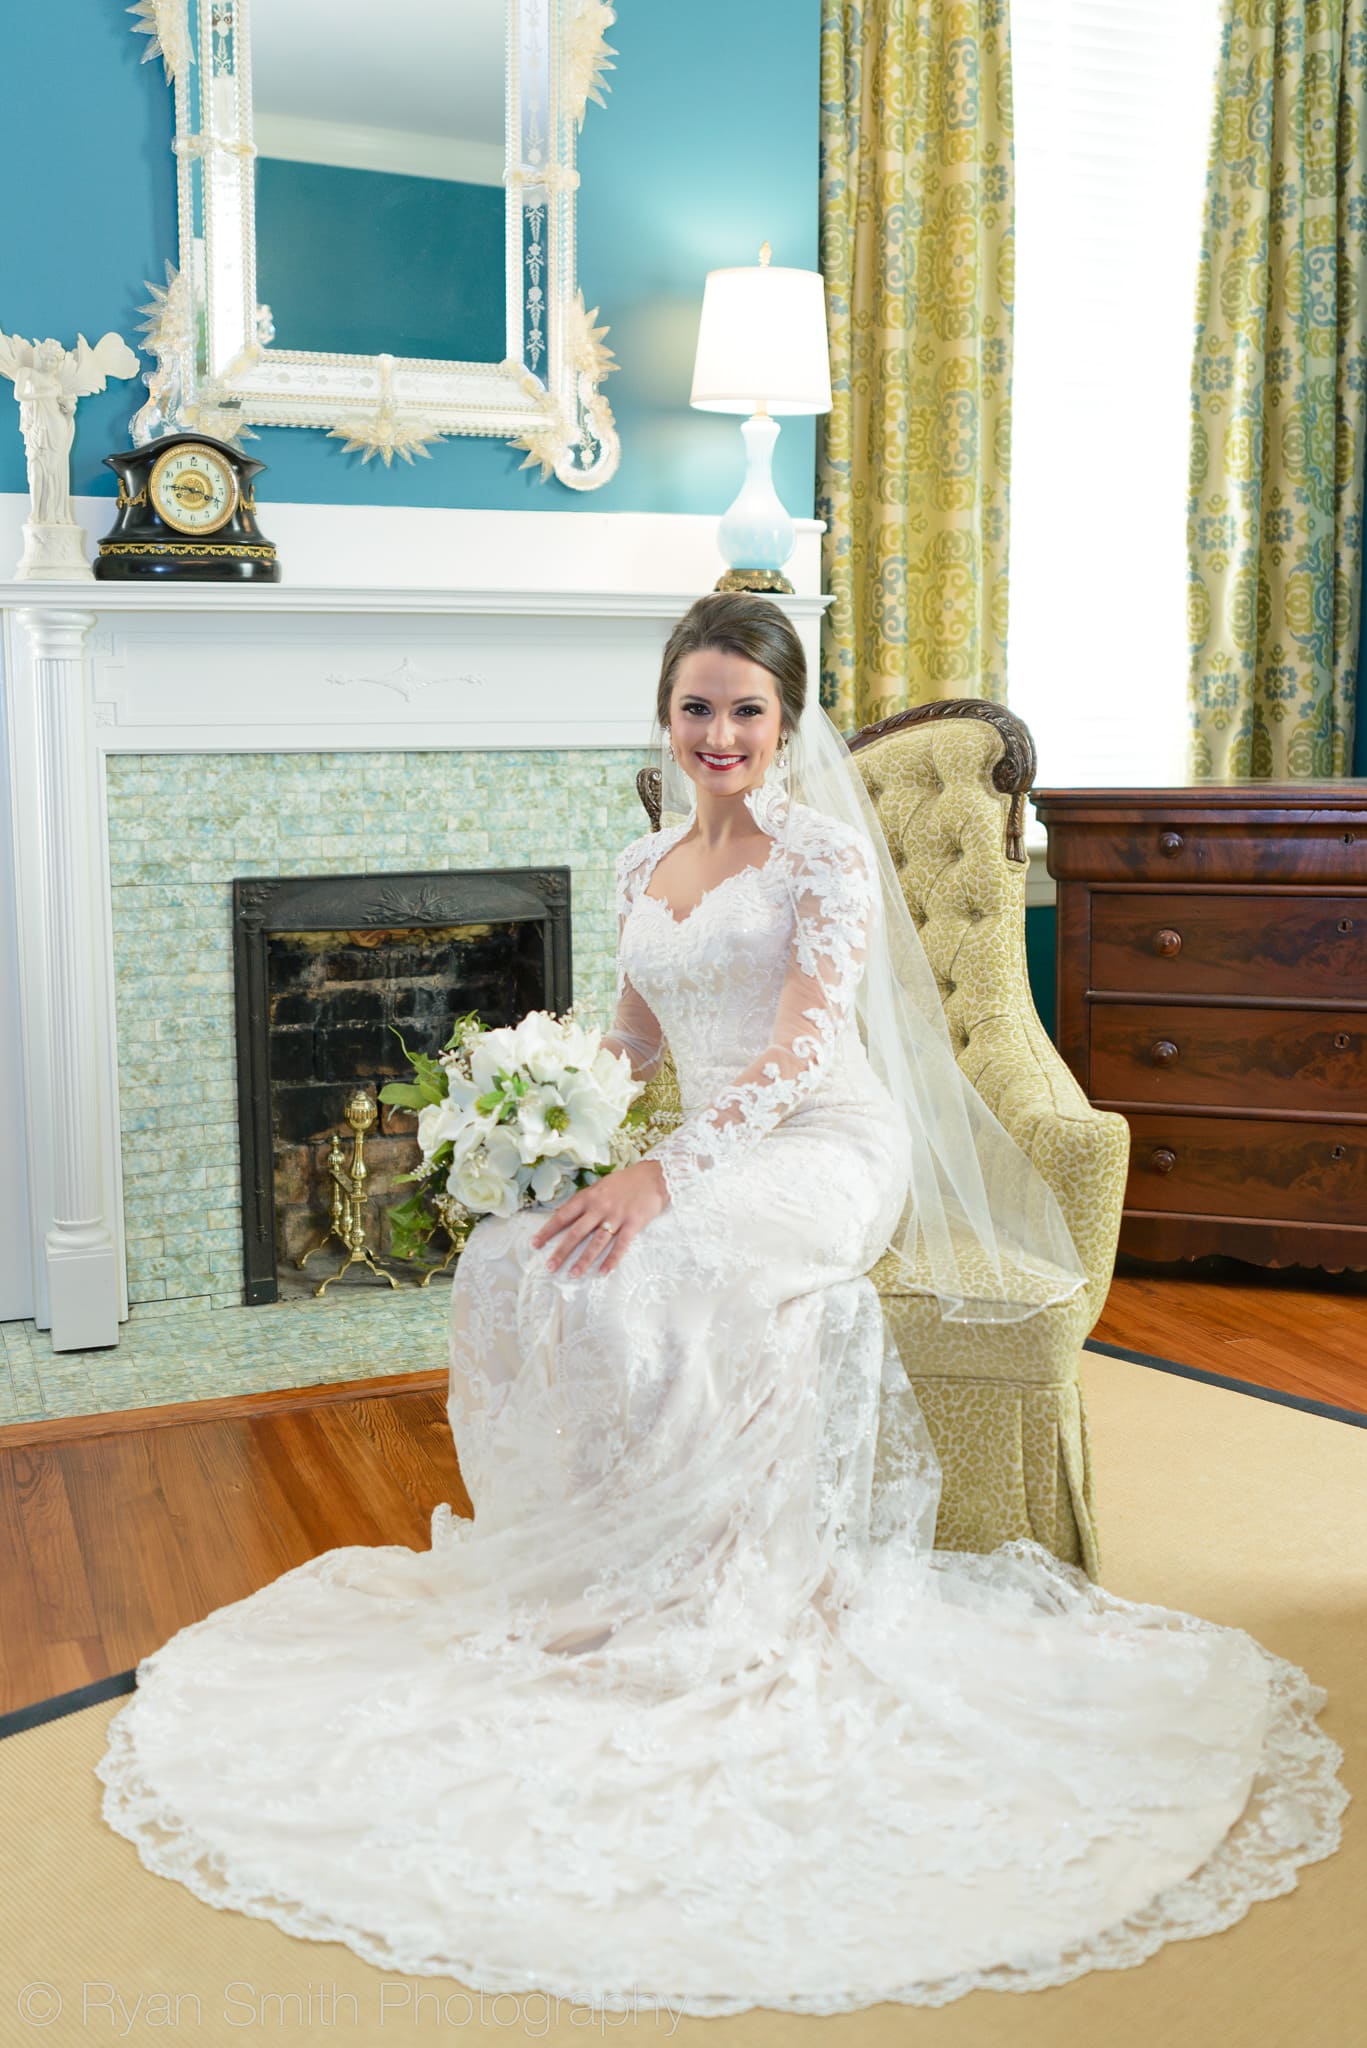 Bride sitting on classic chair - Rosewood Manor - Marion - Rosewood Manor, Marion